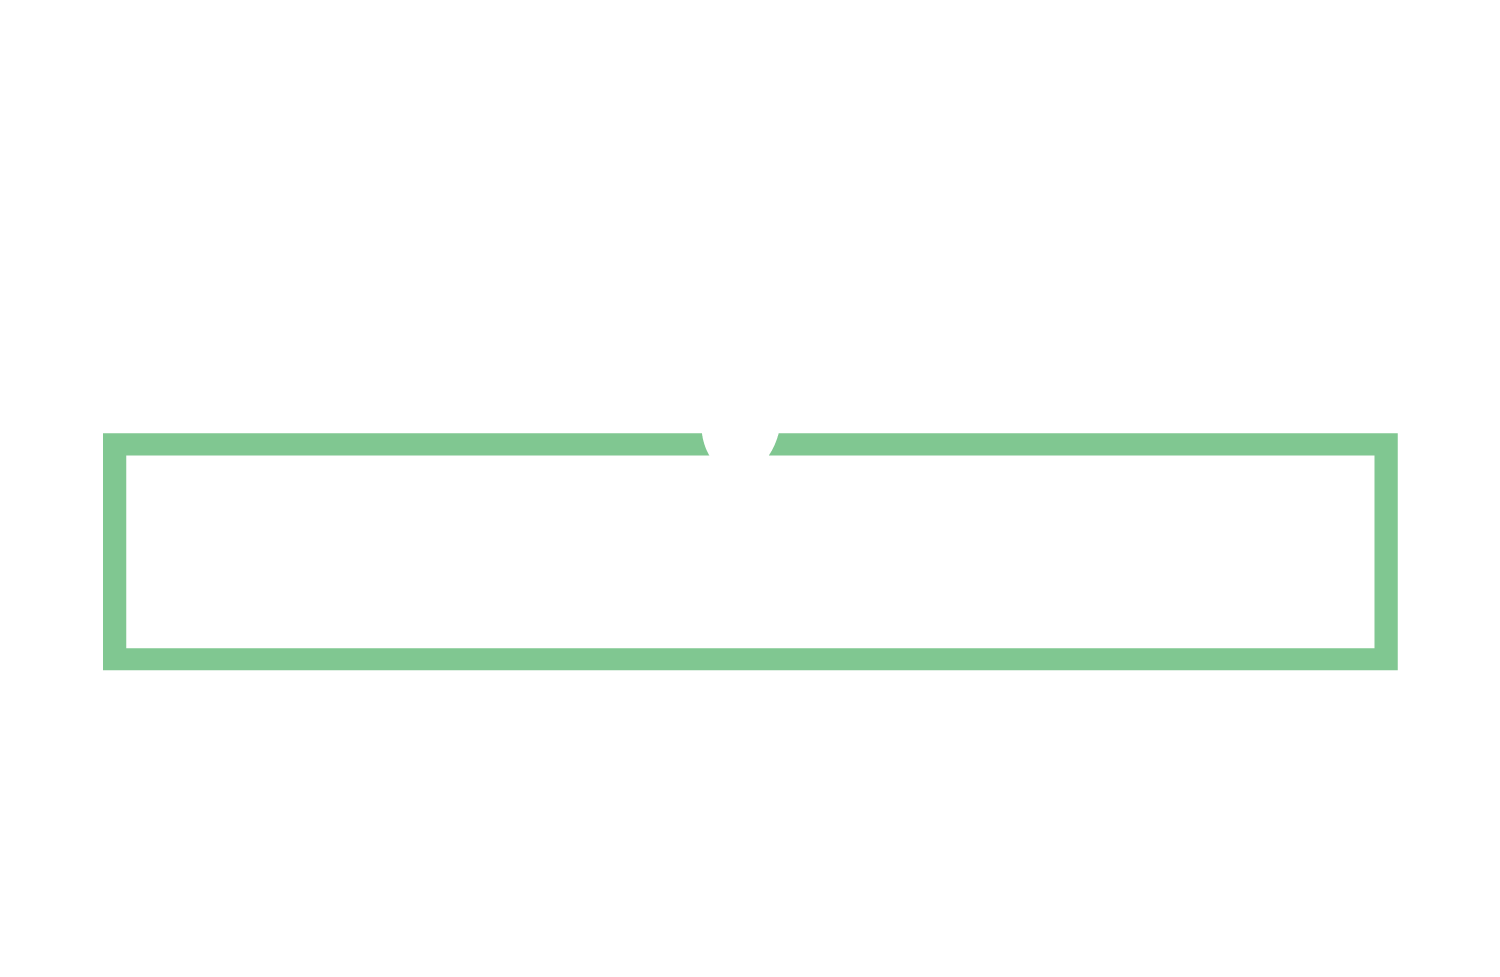 Discover an Oasis of Taste Food Hall Today!